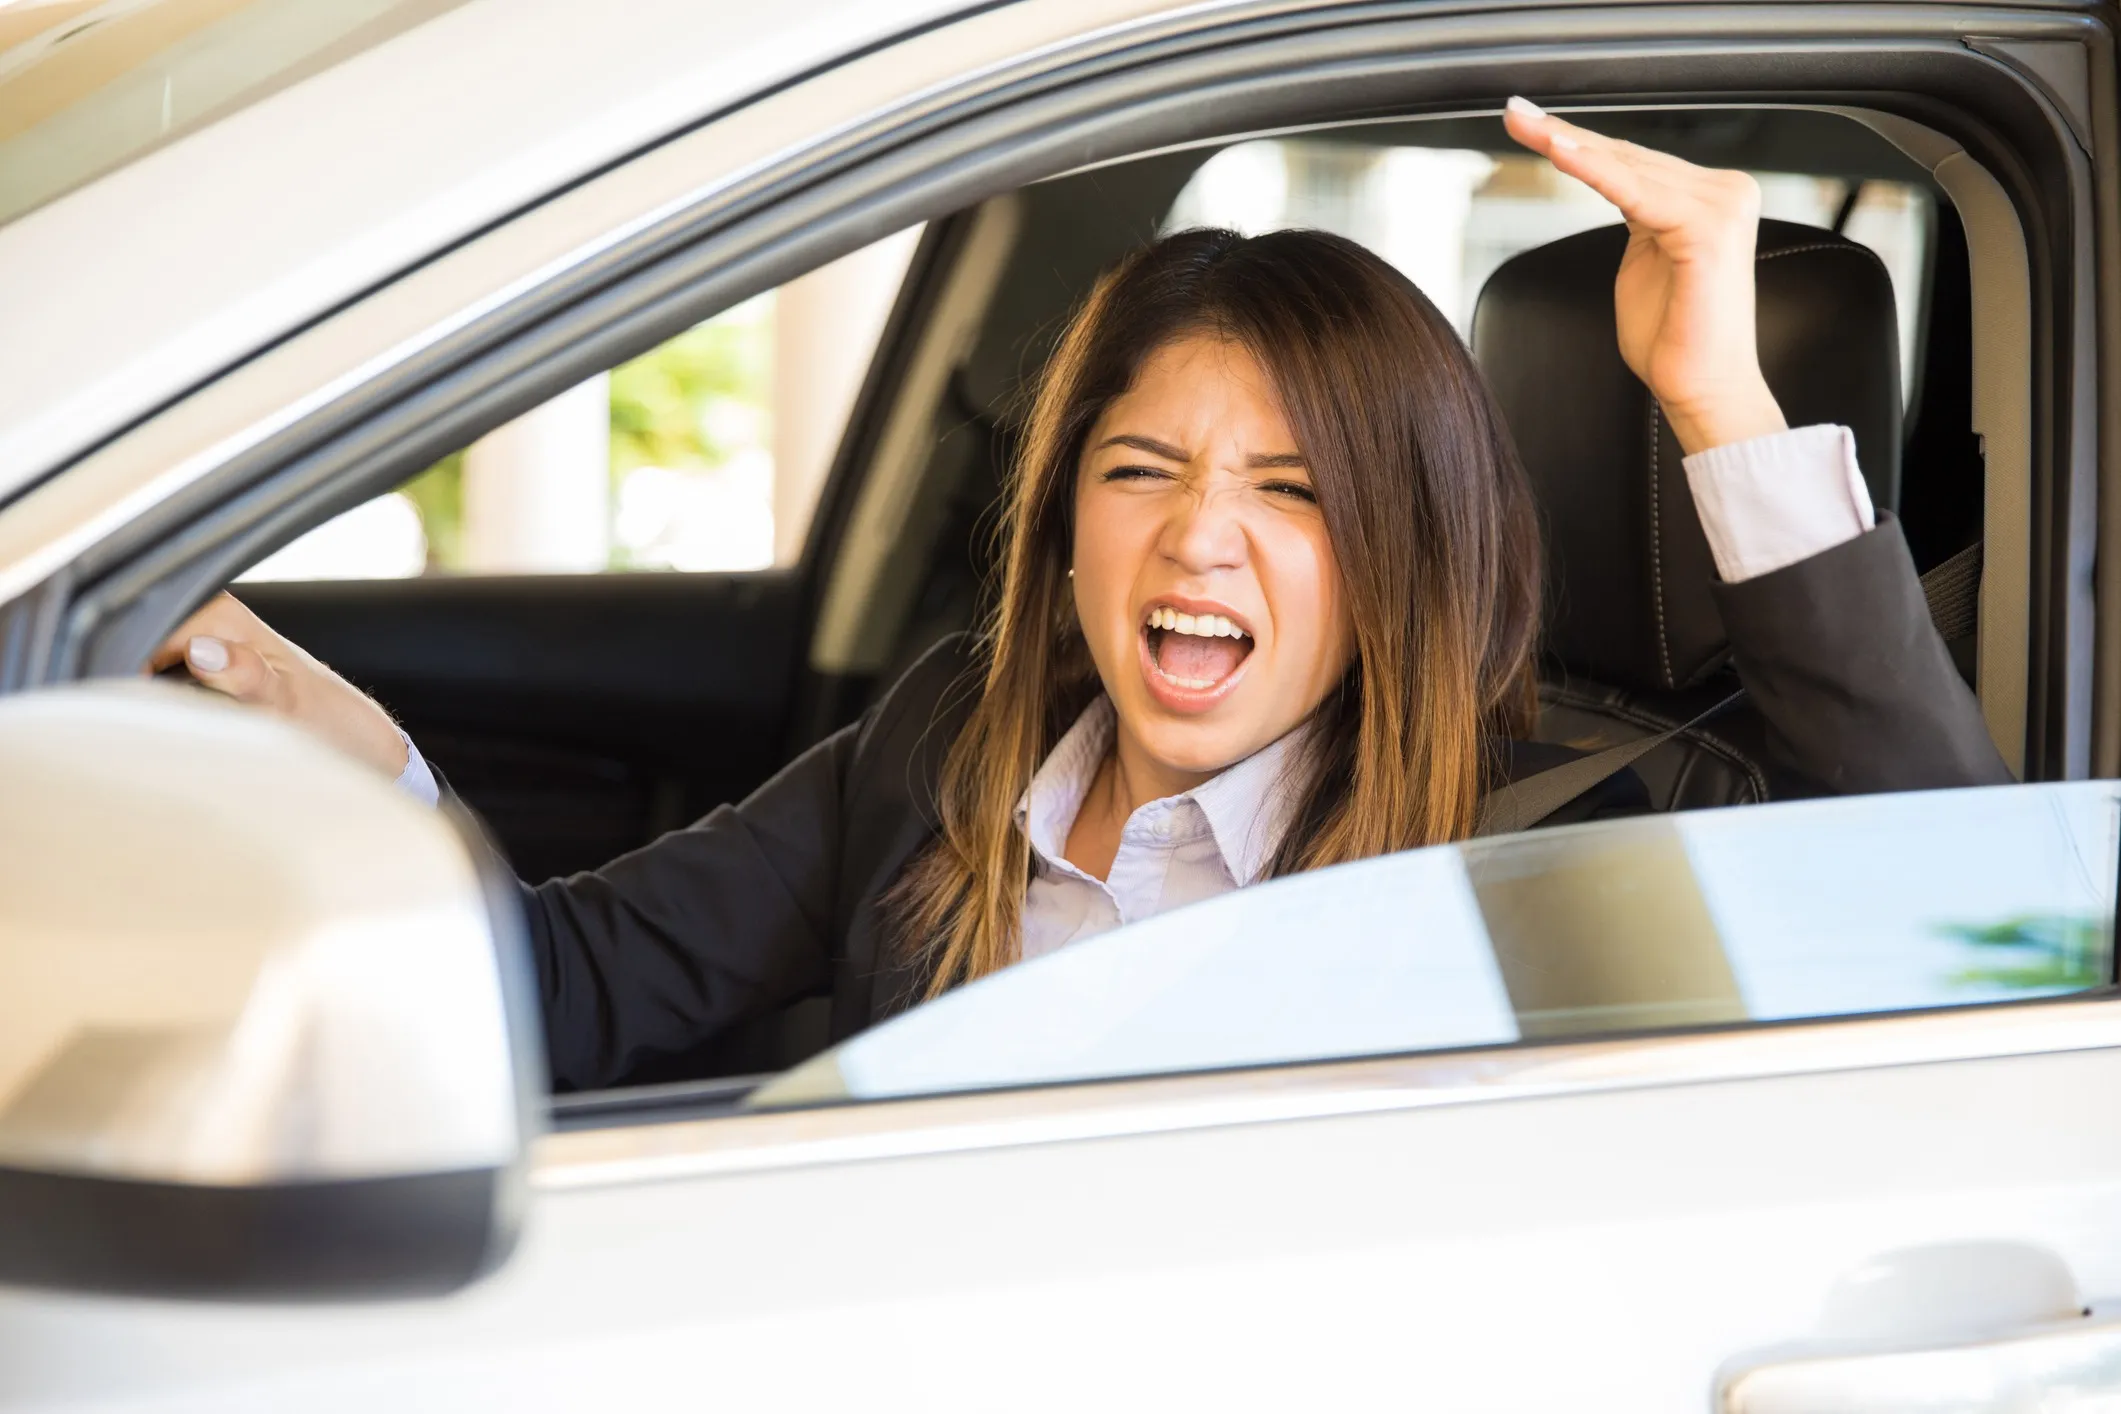 Texas Road Rage Car Accident Lawyer